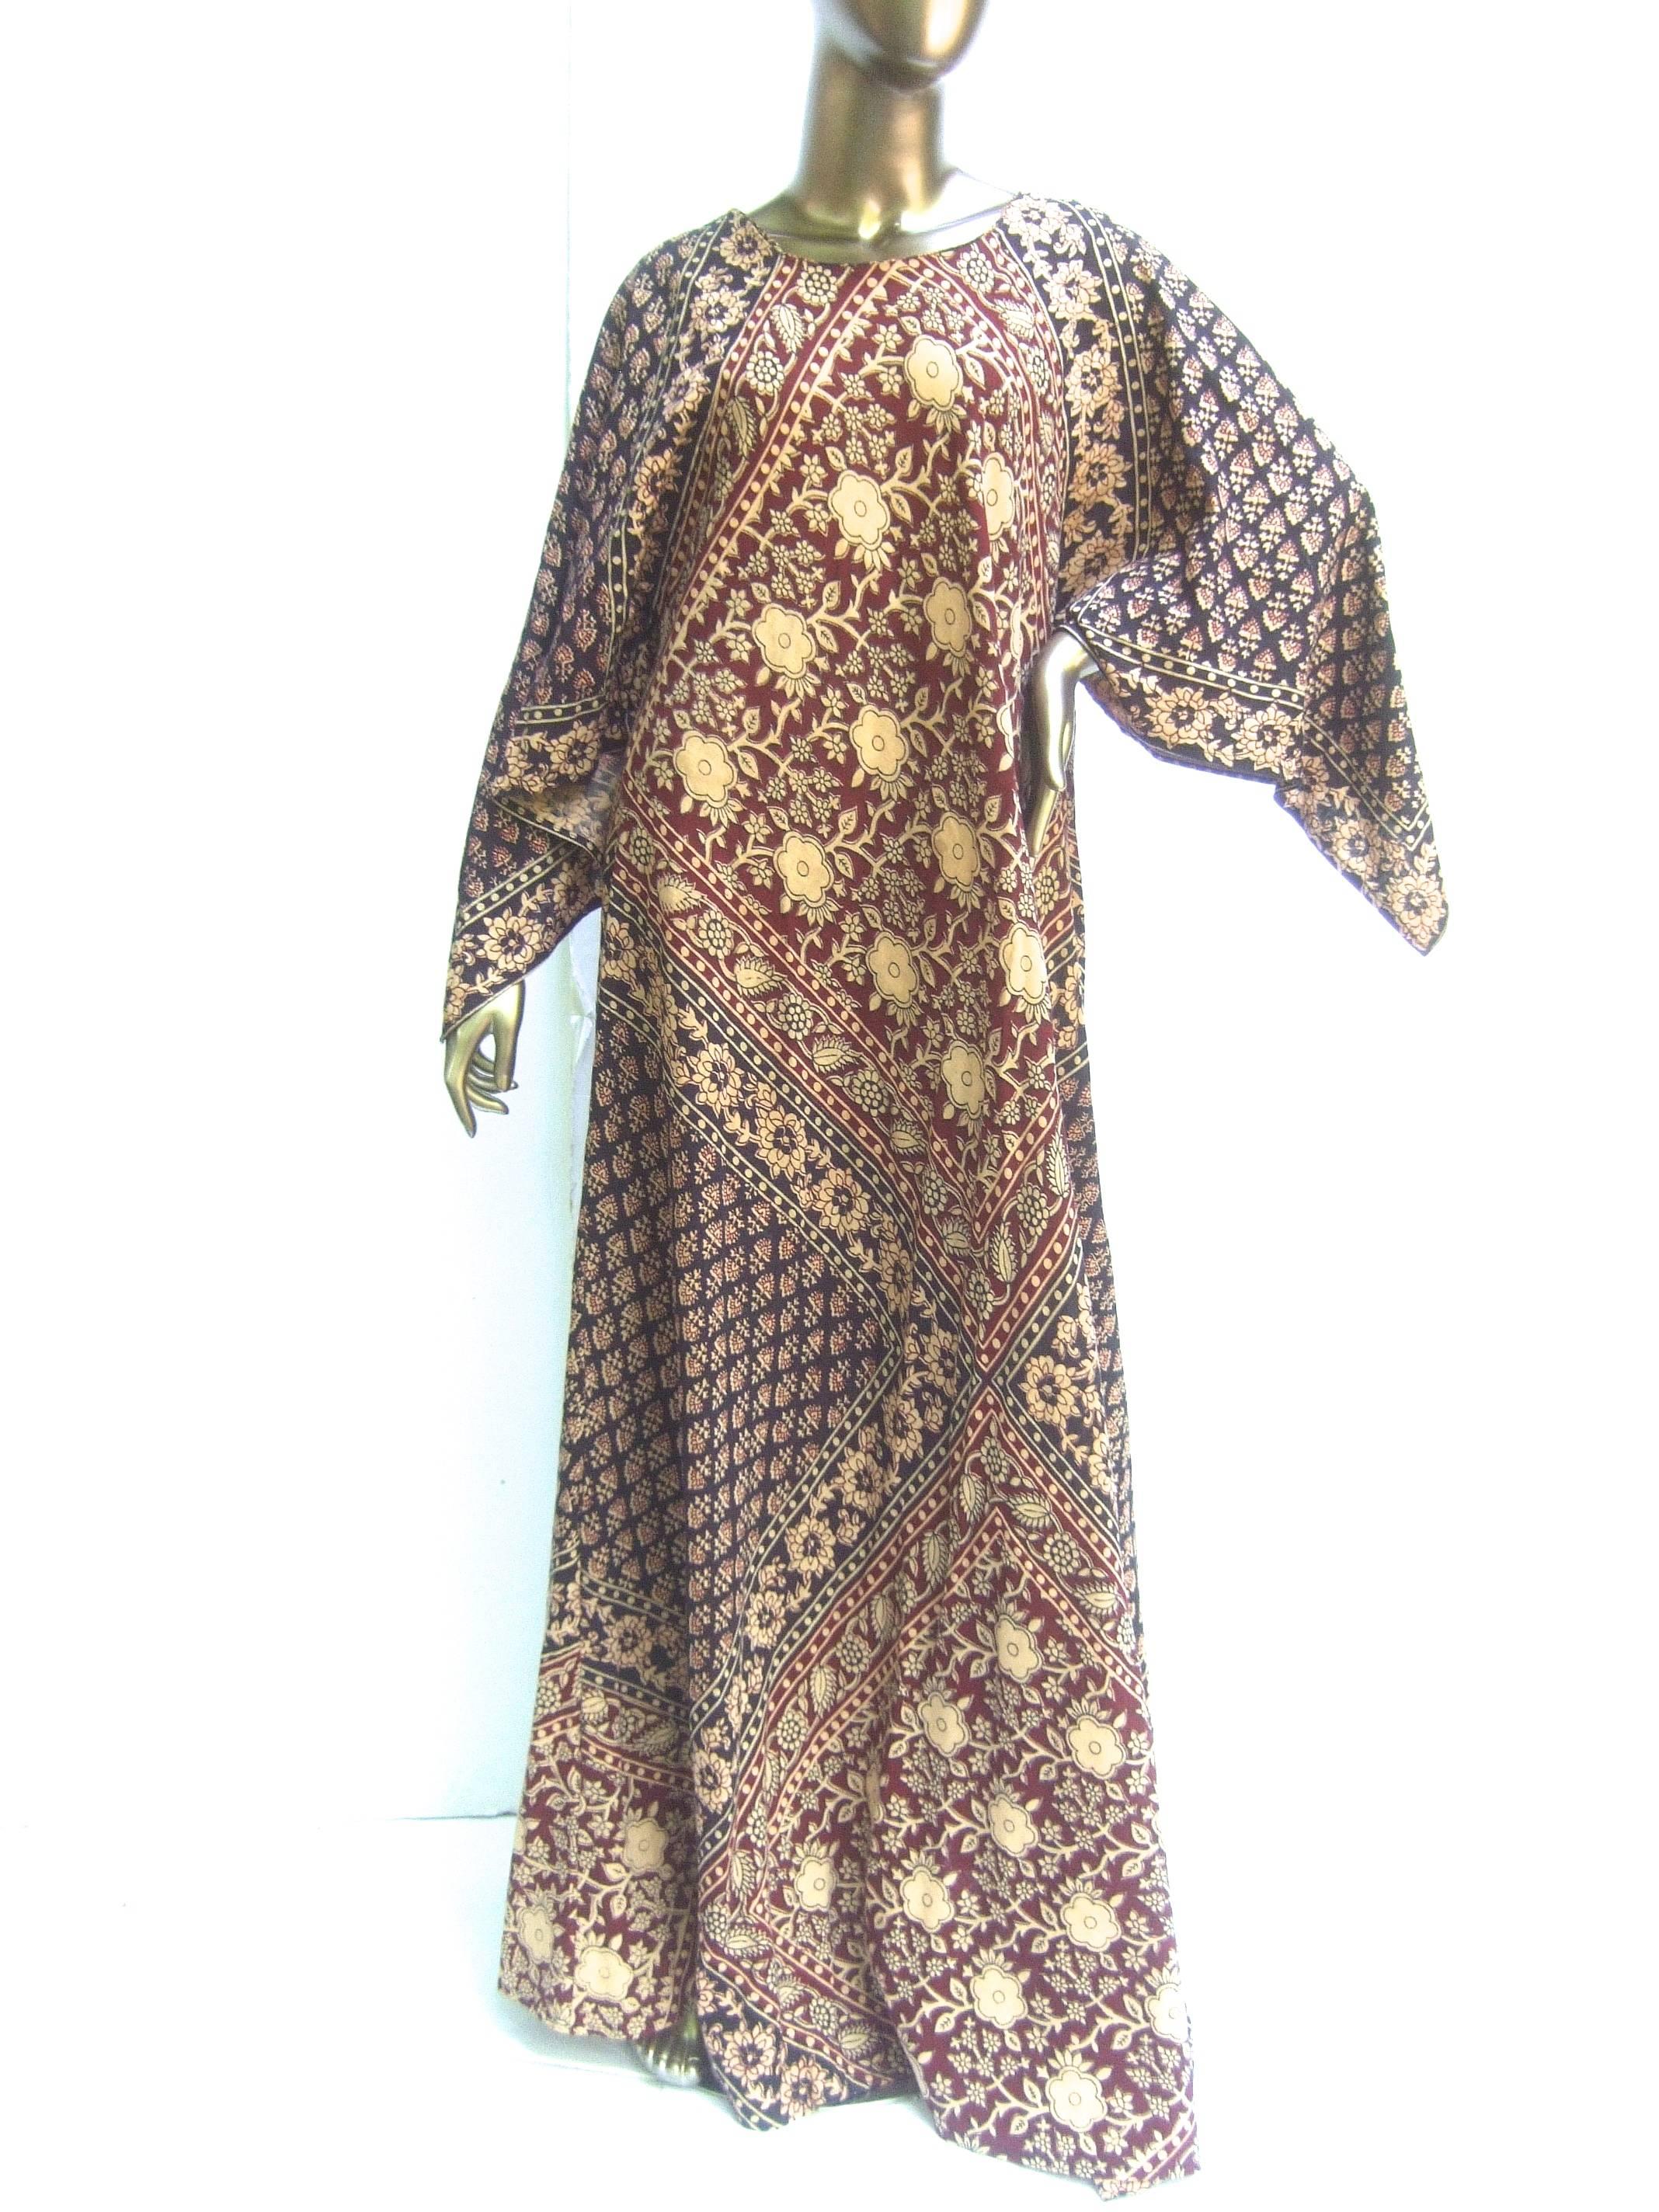 Exotic bohemian cotton print festival caftan gown c 1970s 
The ethnic caftan gown is a collage of intricate 
floral color block designs in contrasting burgundy,
beige and black 

The sleeves have a voluminous winged design 
Transitions effortlessly